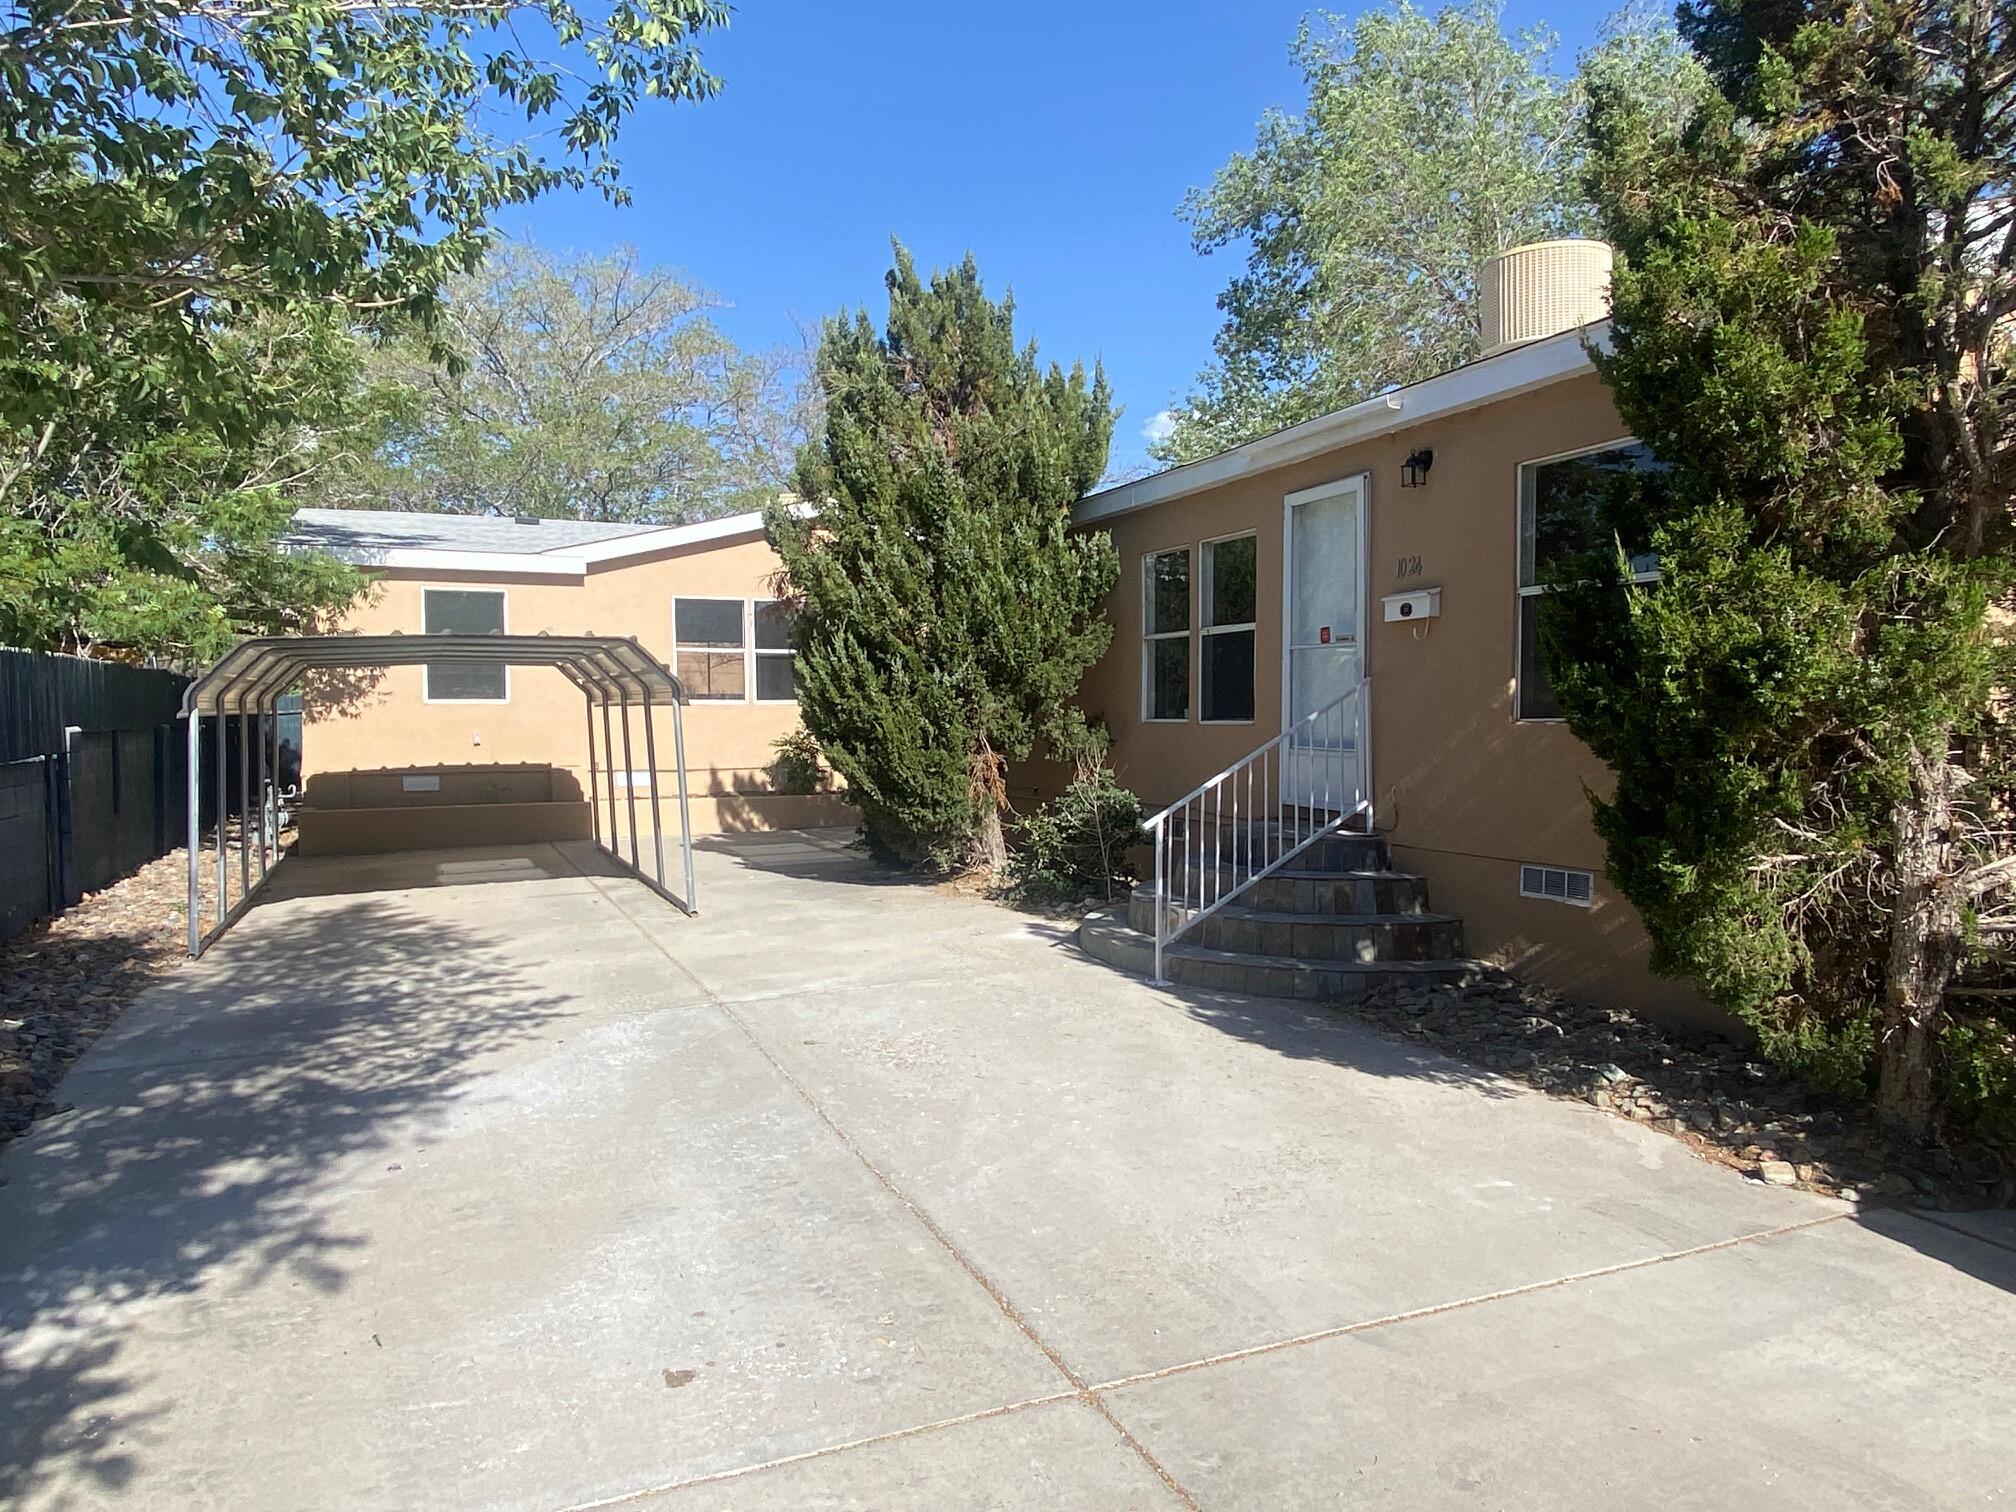 RARE FIND, Two Homes in One! 1026 & 1024 Palomas! Both w/ Newer Roofs & Stucco, FRESH Paint, New Wood Lam Flooring, PLUSH New Carpet, New Baseboard, New Door Hardware, New LED Lighting Package! UPGRADED Kitchens: 1024 w/ New Shaker Cabs, 1026 w/ Refinished Cabs, BOTH w/ New GRANITE Countertops, New Faucet/Sink/Disposals, New Hardware, Recessed Lighting, New STAINLESS STEEL Appliances! UPGRADED Bathrooms w/ New Vanities, Granite Tops, New Sinks/Faucets! 1026 Newer Waterheater, 1024 Brand New Waterheater! Low Maintenance Landscaping, Patio and Shed in Backyard! Single Carport + Additional Parking! HUGE Cashflow as Short or Long Term Rentals, Live in One Rent out the Other..Tons of Potential! SPOTLESS and MOVE IN READY, Don't Wait This GEM Wont Last!